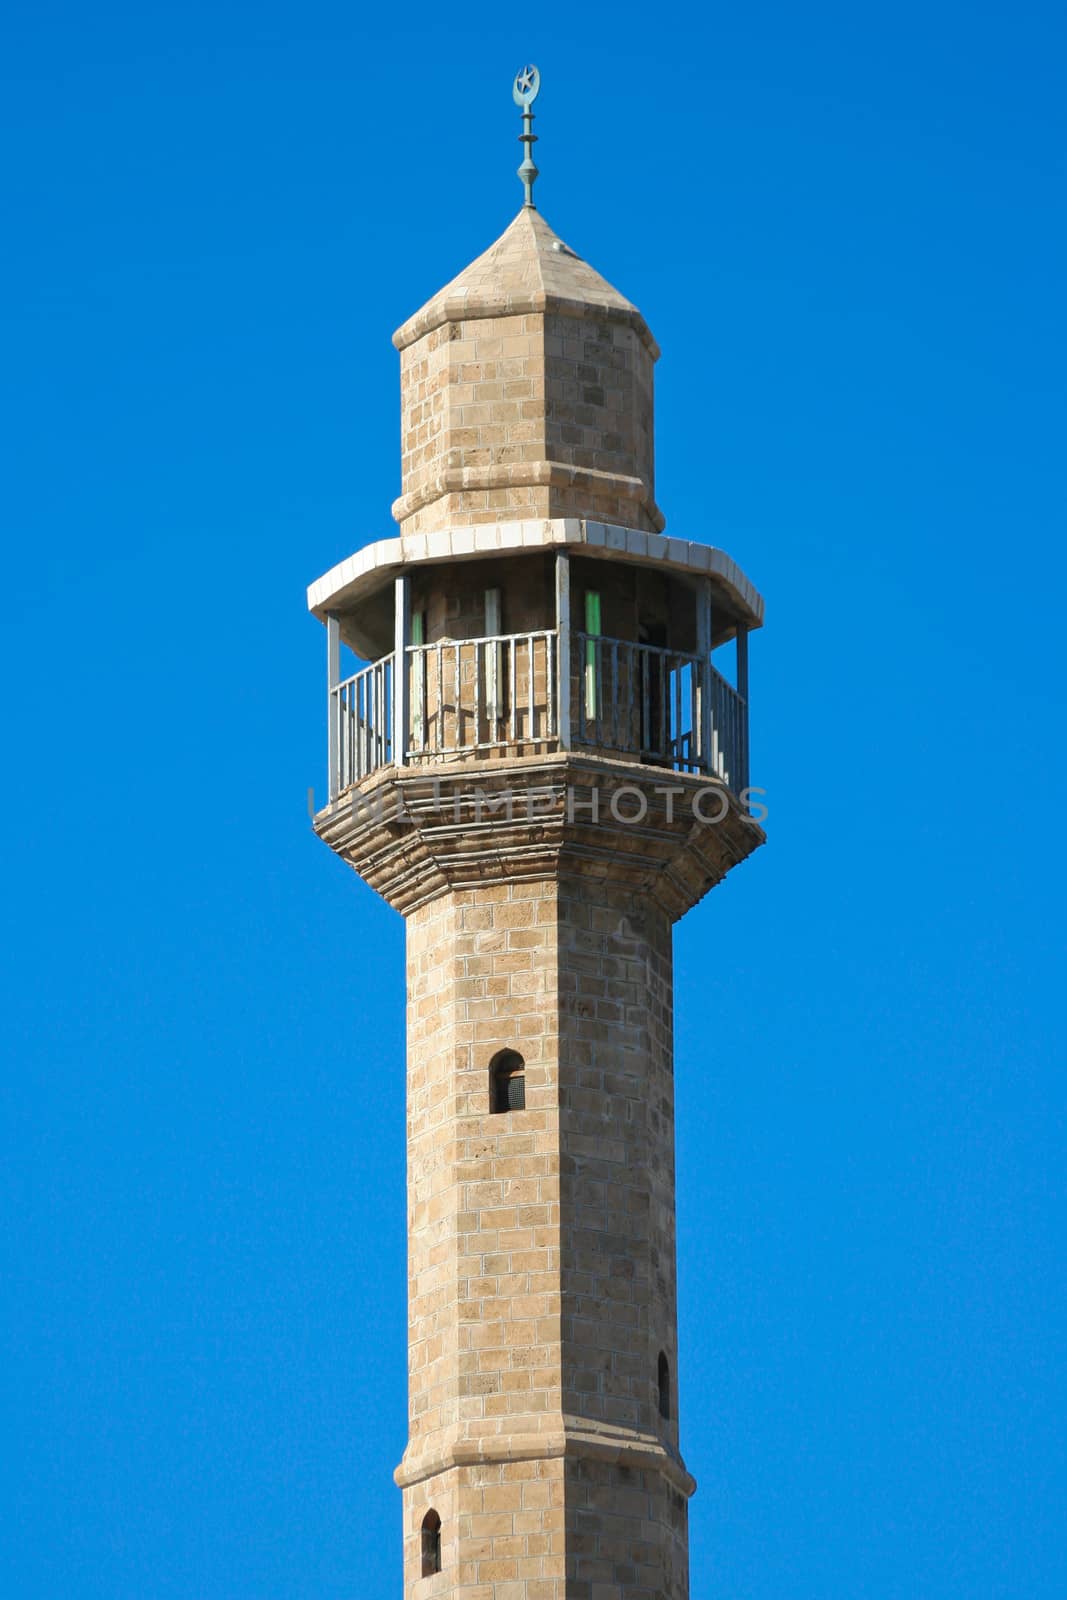 Mosque tower on blue sky background